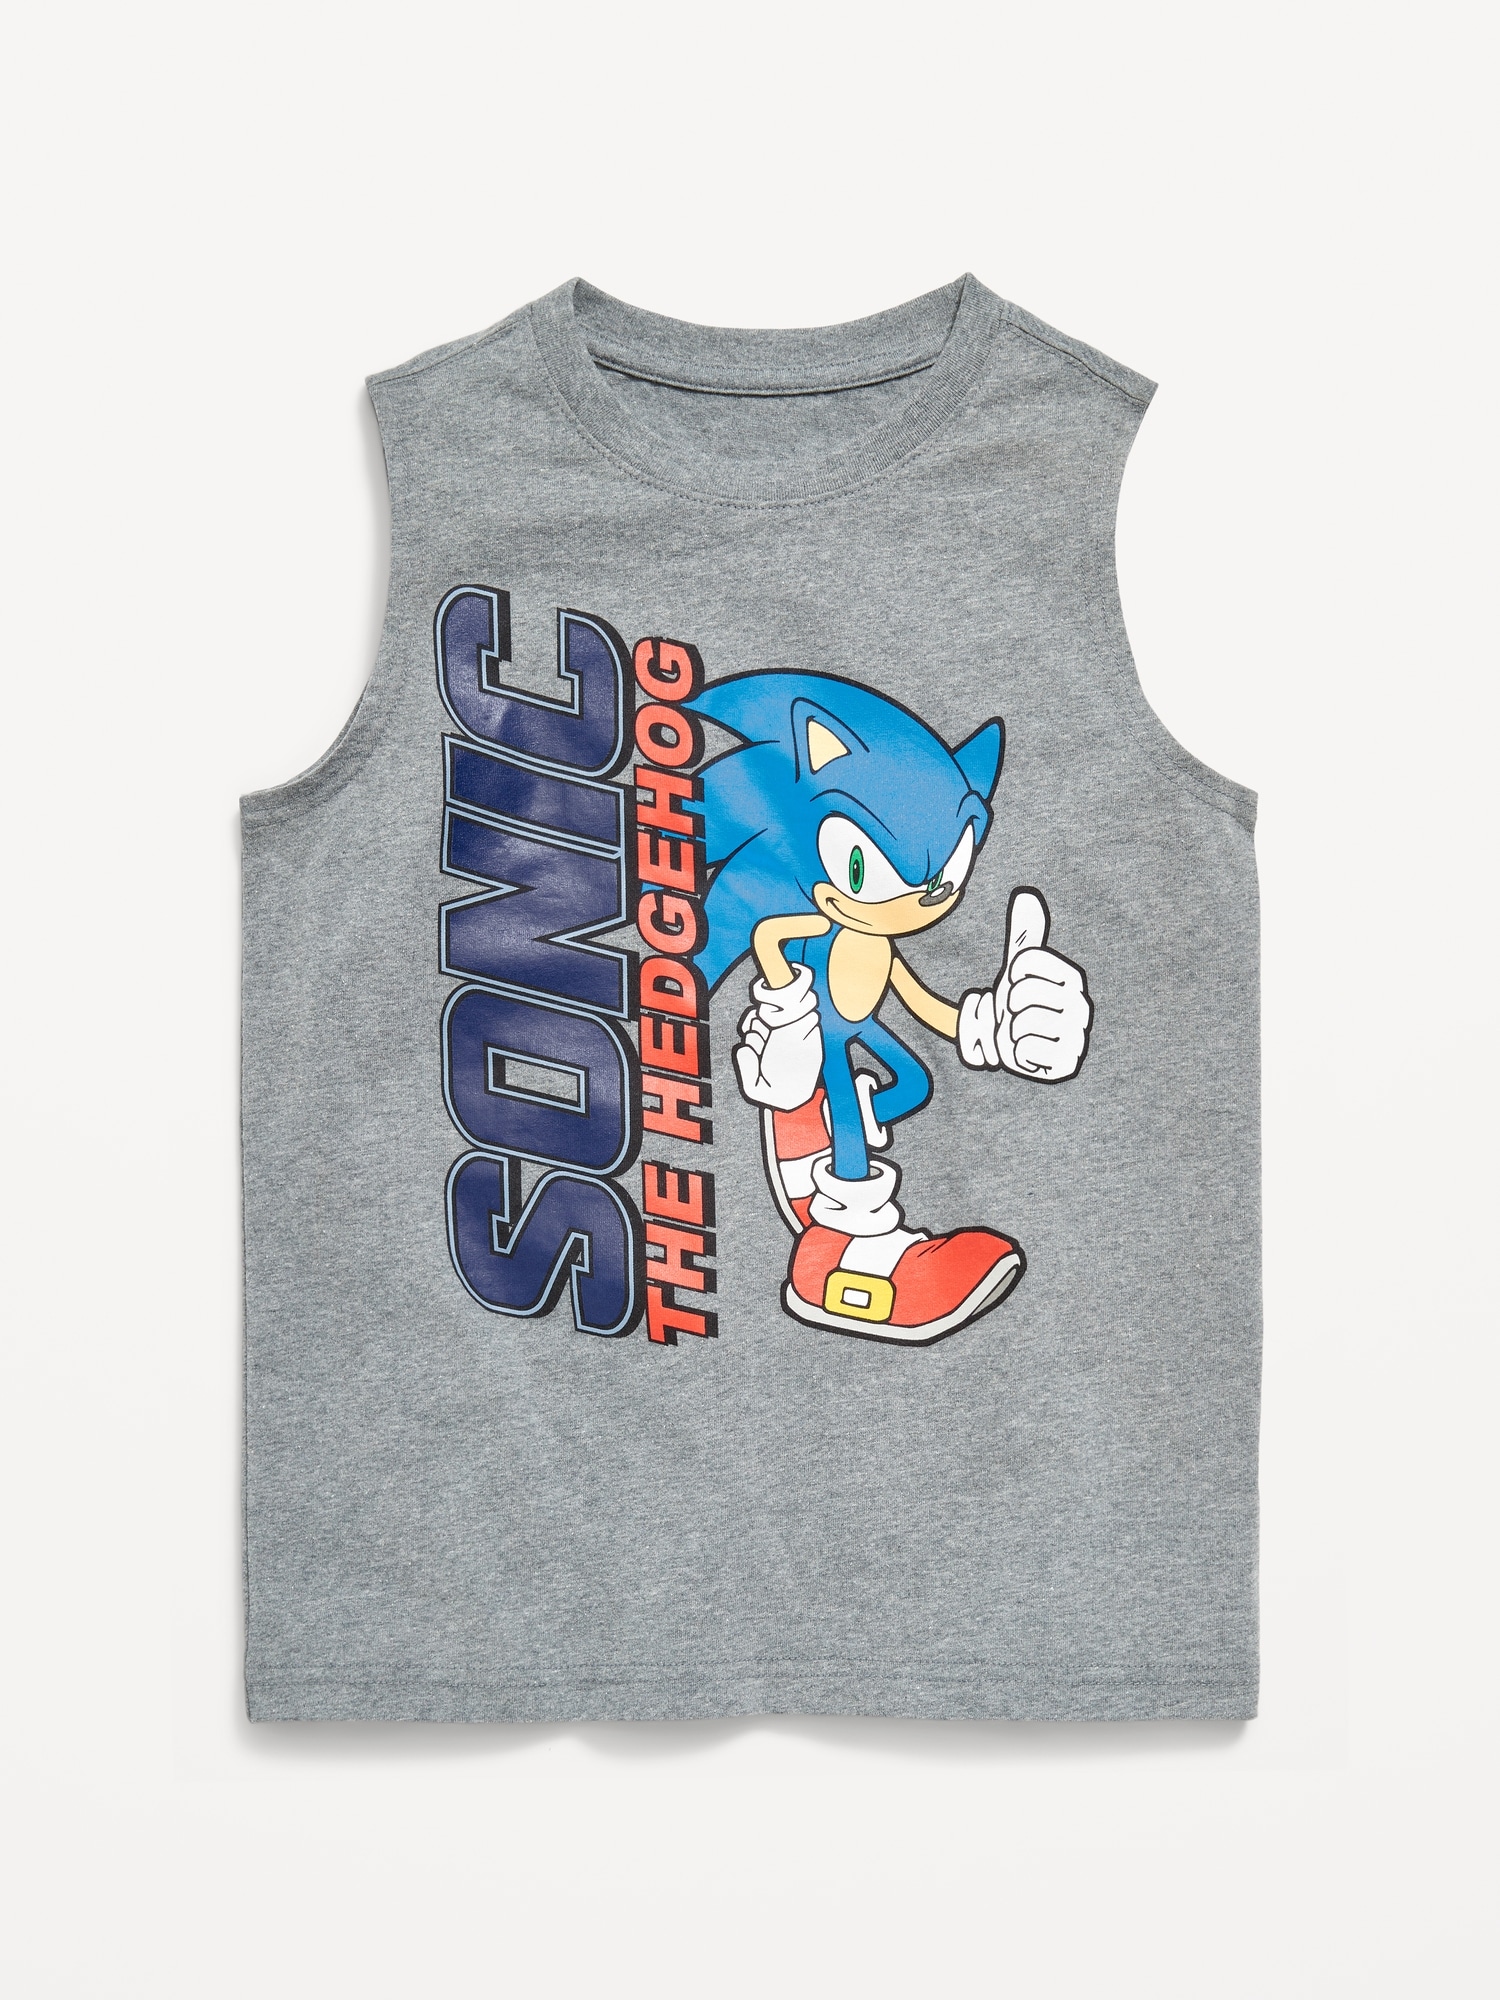 Sonic The Hedgehog Gender-Neutral Graphic Tank Top for Kids Hot Deal